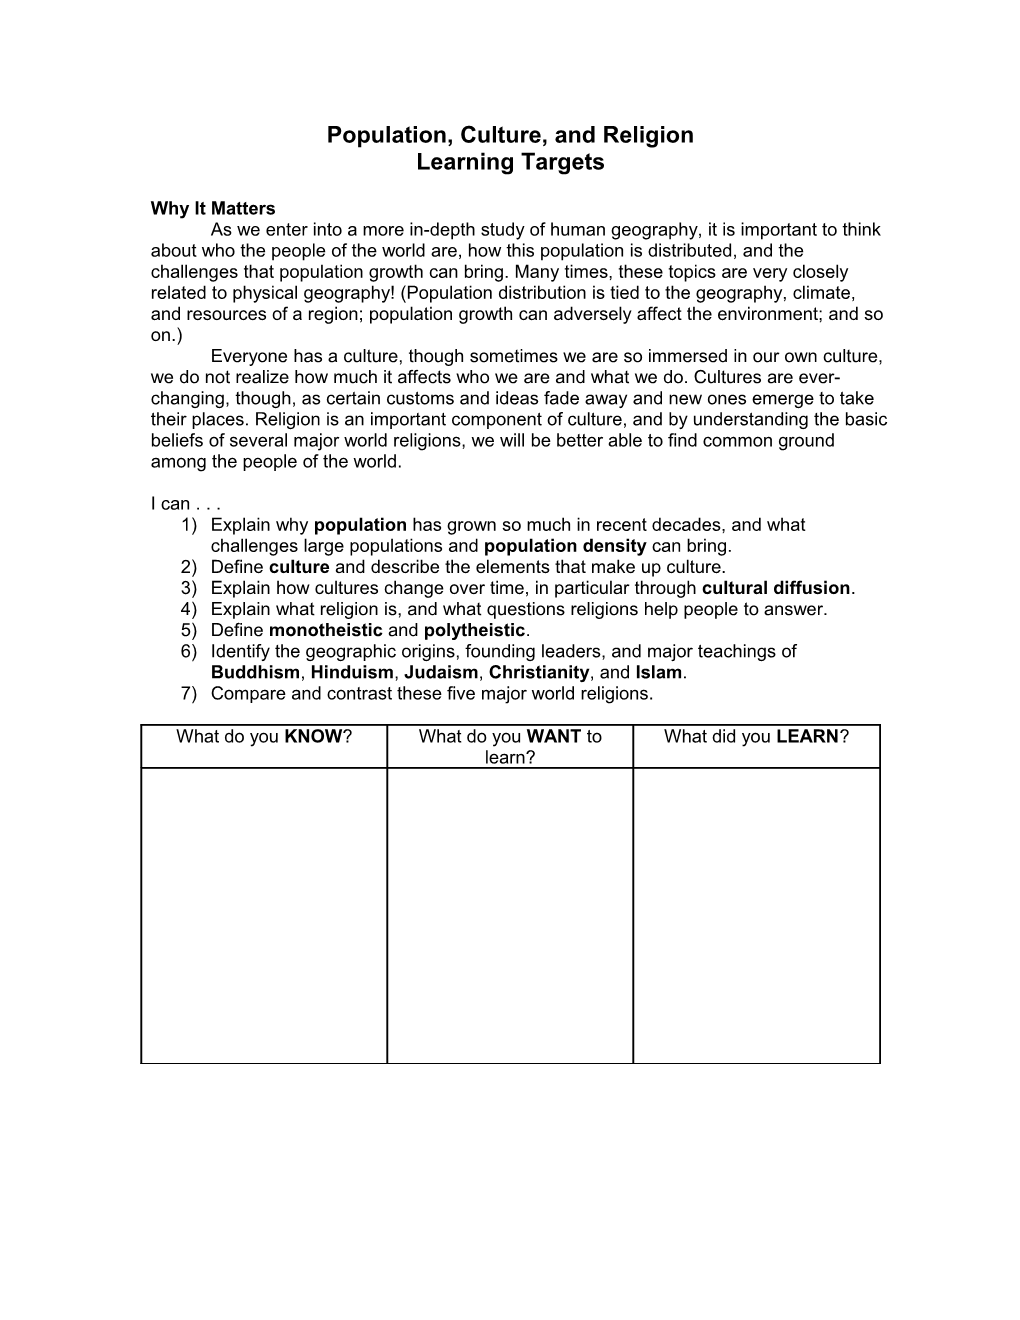 Human Geography Learning Targets